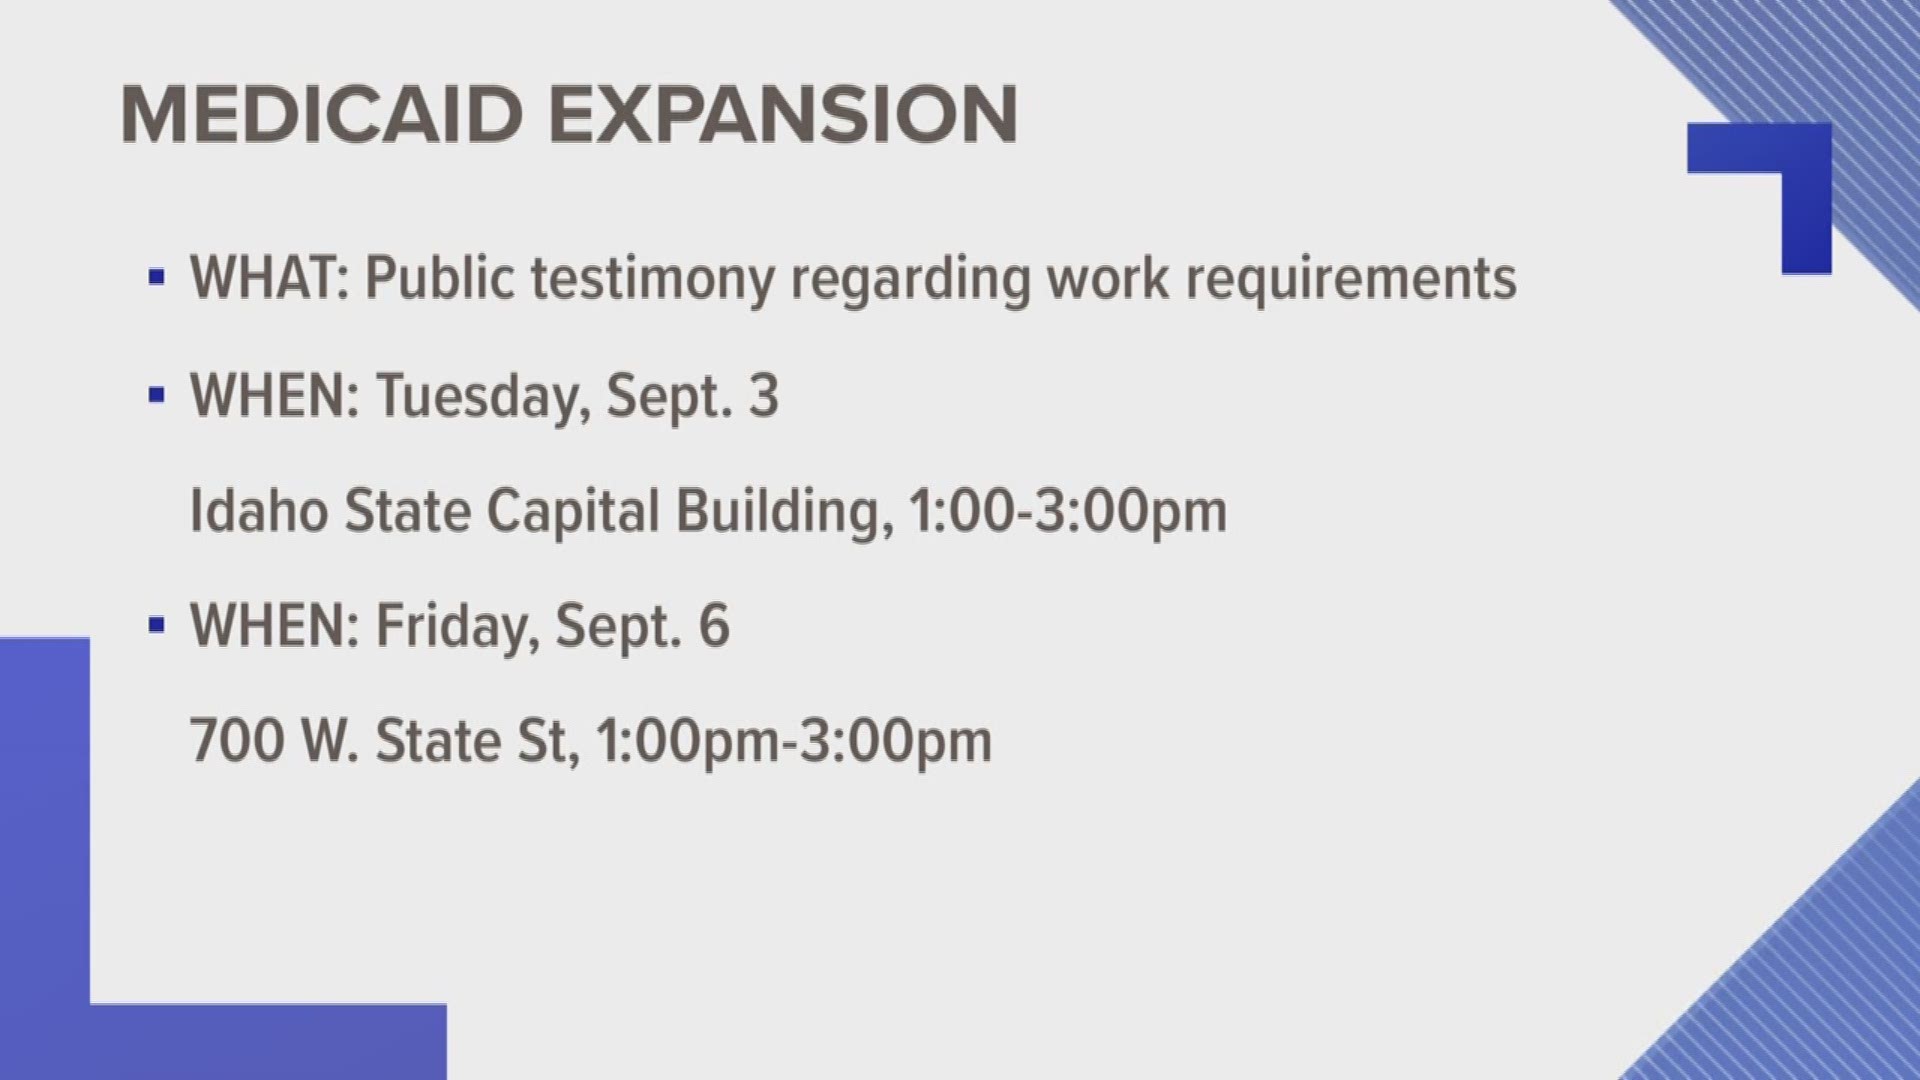 Idahoans will soon have the opportunity to weigh in on proposed work requirements to Idaho's Medicaid expansion. On Tuesday, Sept. 3 from 1 to 3 p.m. at the Idaho State Capitol Building and on Friday, Sept. 5 from 1 to 3 p.m. at 700 West State Street, the Department of Health and Welfare will hold public hearings for input on the proposal.